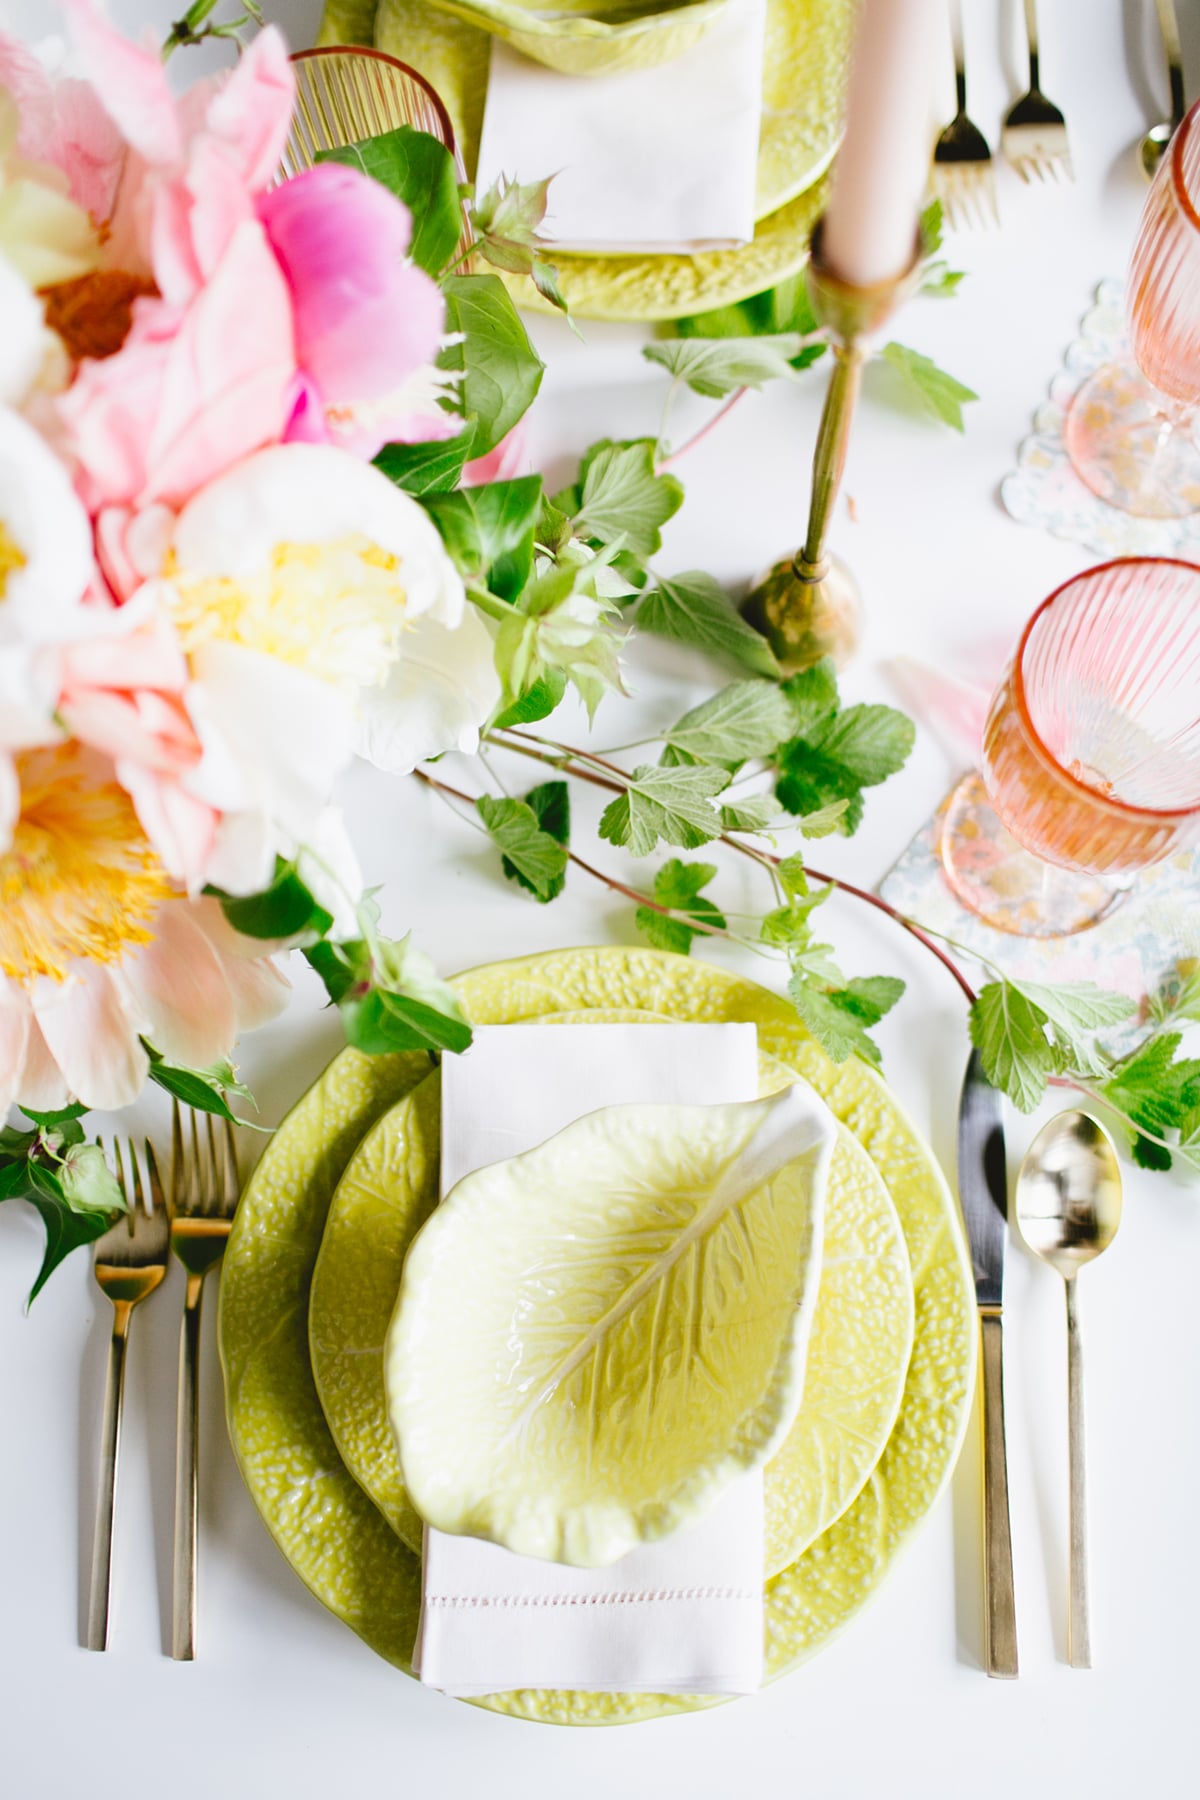 vintage dishes and glassware in pink and citron for this summer tabletop | coco kelley